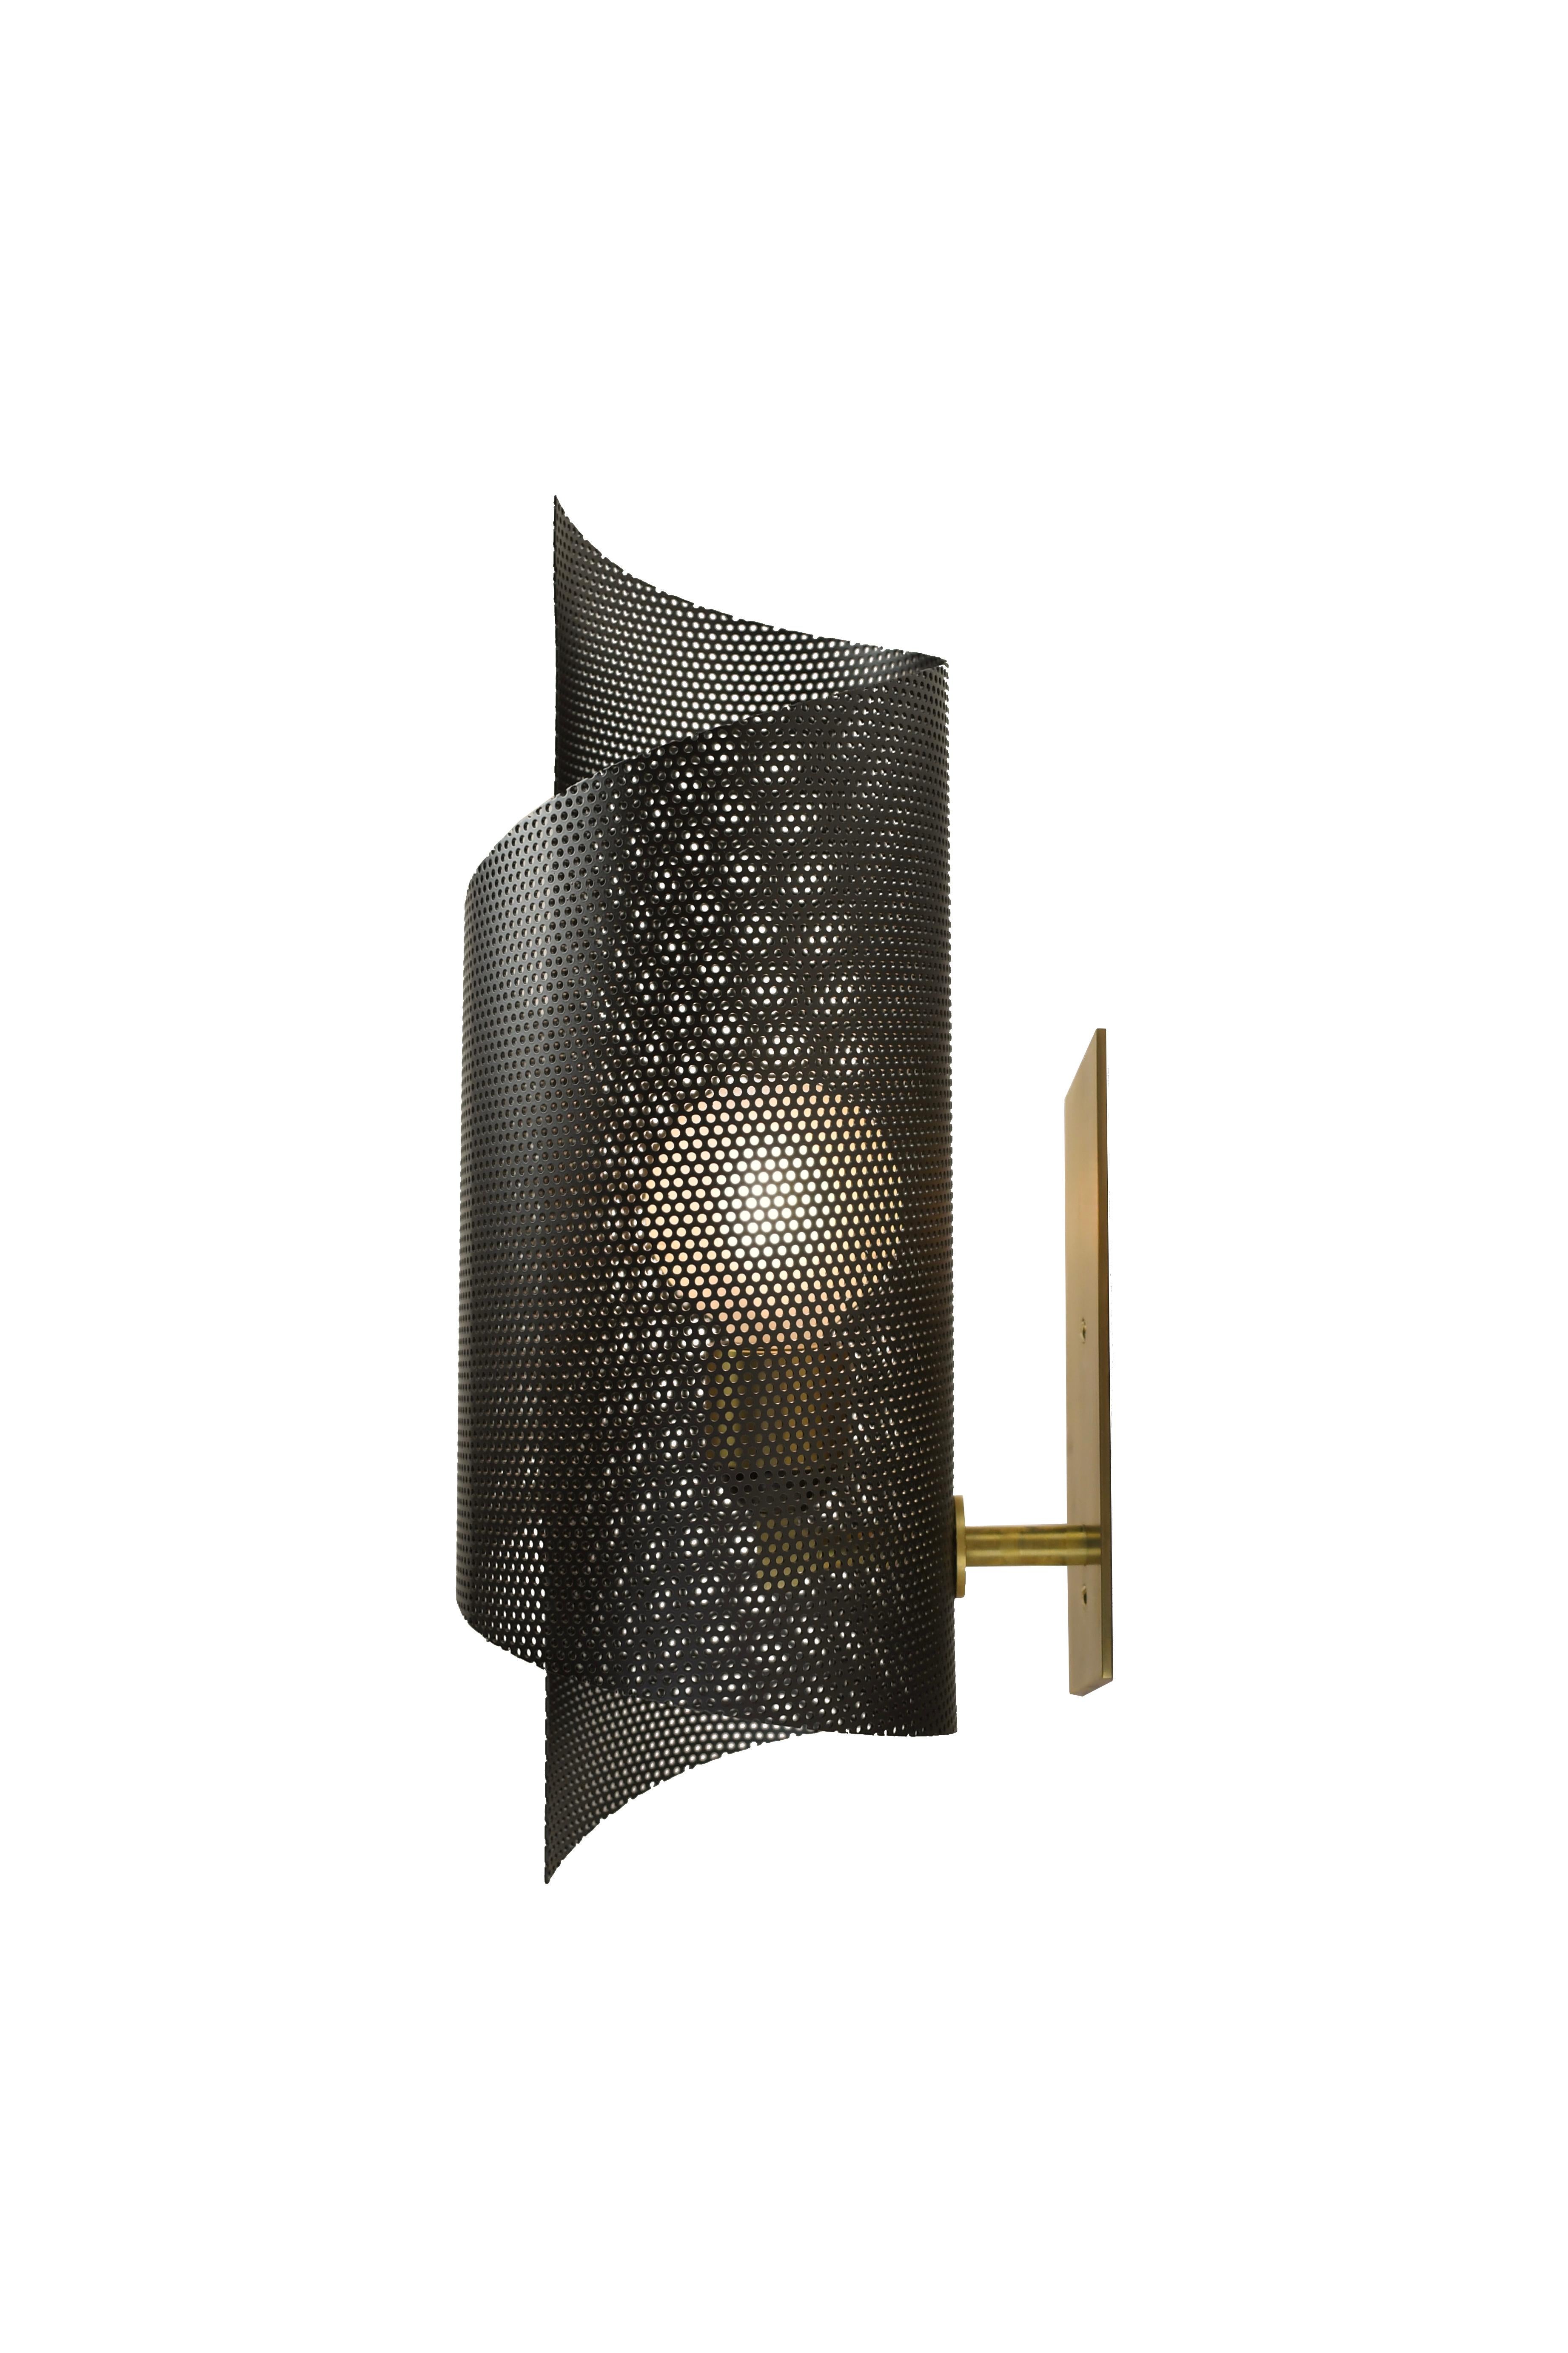 The Spun Tulle wall sconce is a graceful, commanding piece of sculpture that works well in both modern and transitional interiors. Shown here in our matte black enamel and natural brass hardware. 

About the Tulle collection: 
Blueprint